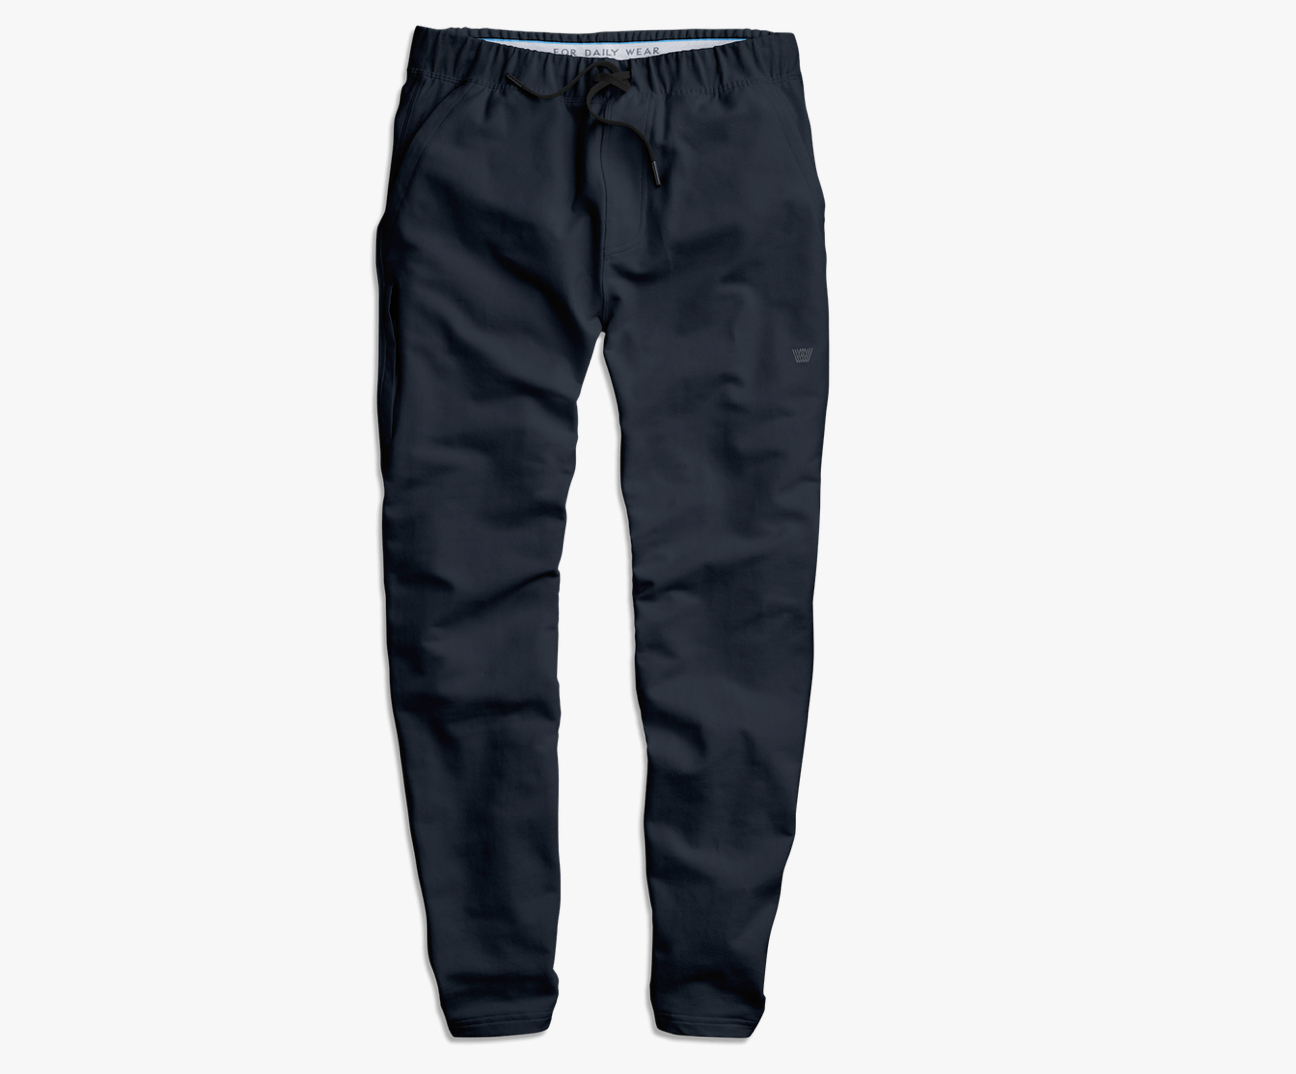 Runner-Up Joggers